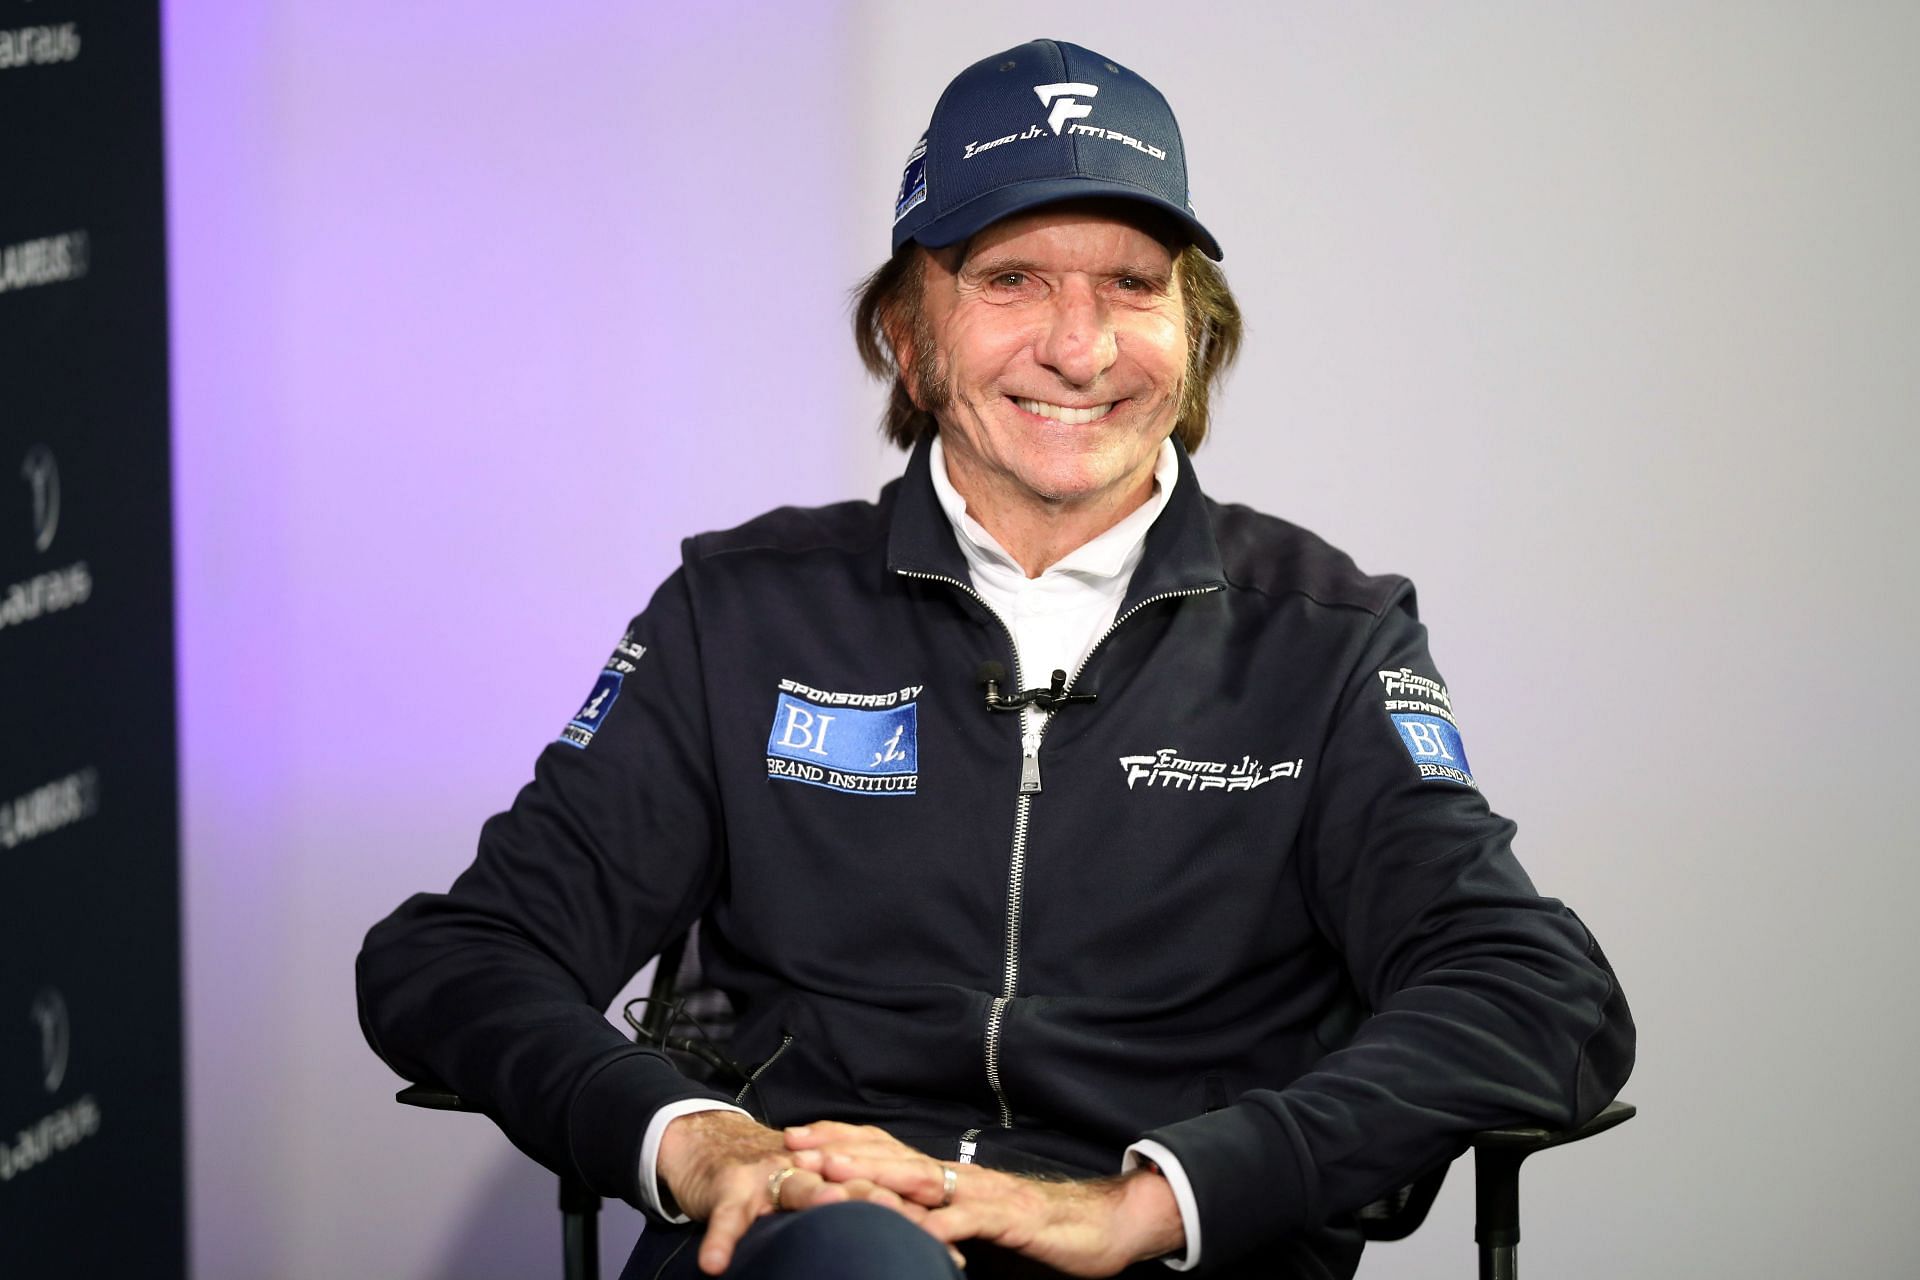 Emerson Fittipaldi was the winner of one of the closest seasons in the history of F1